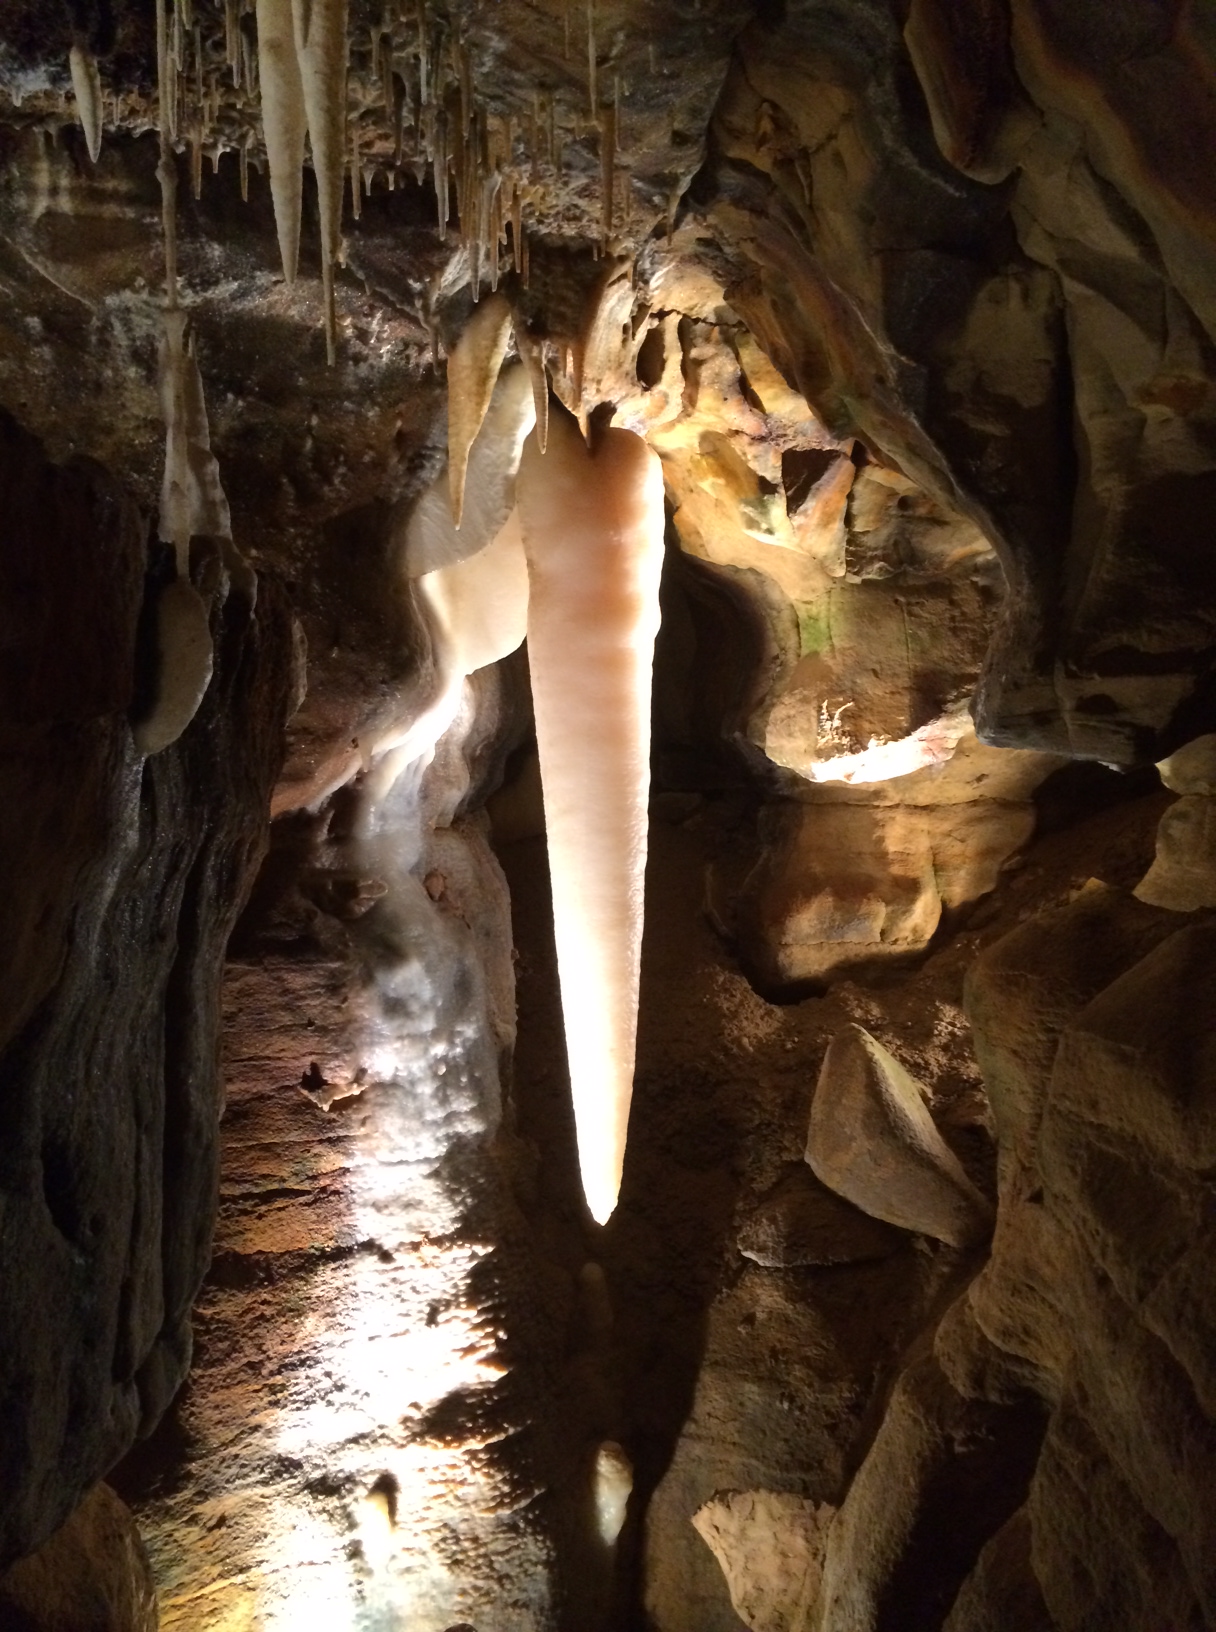 This is what a 200,000-year-old stalactite looks like.